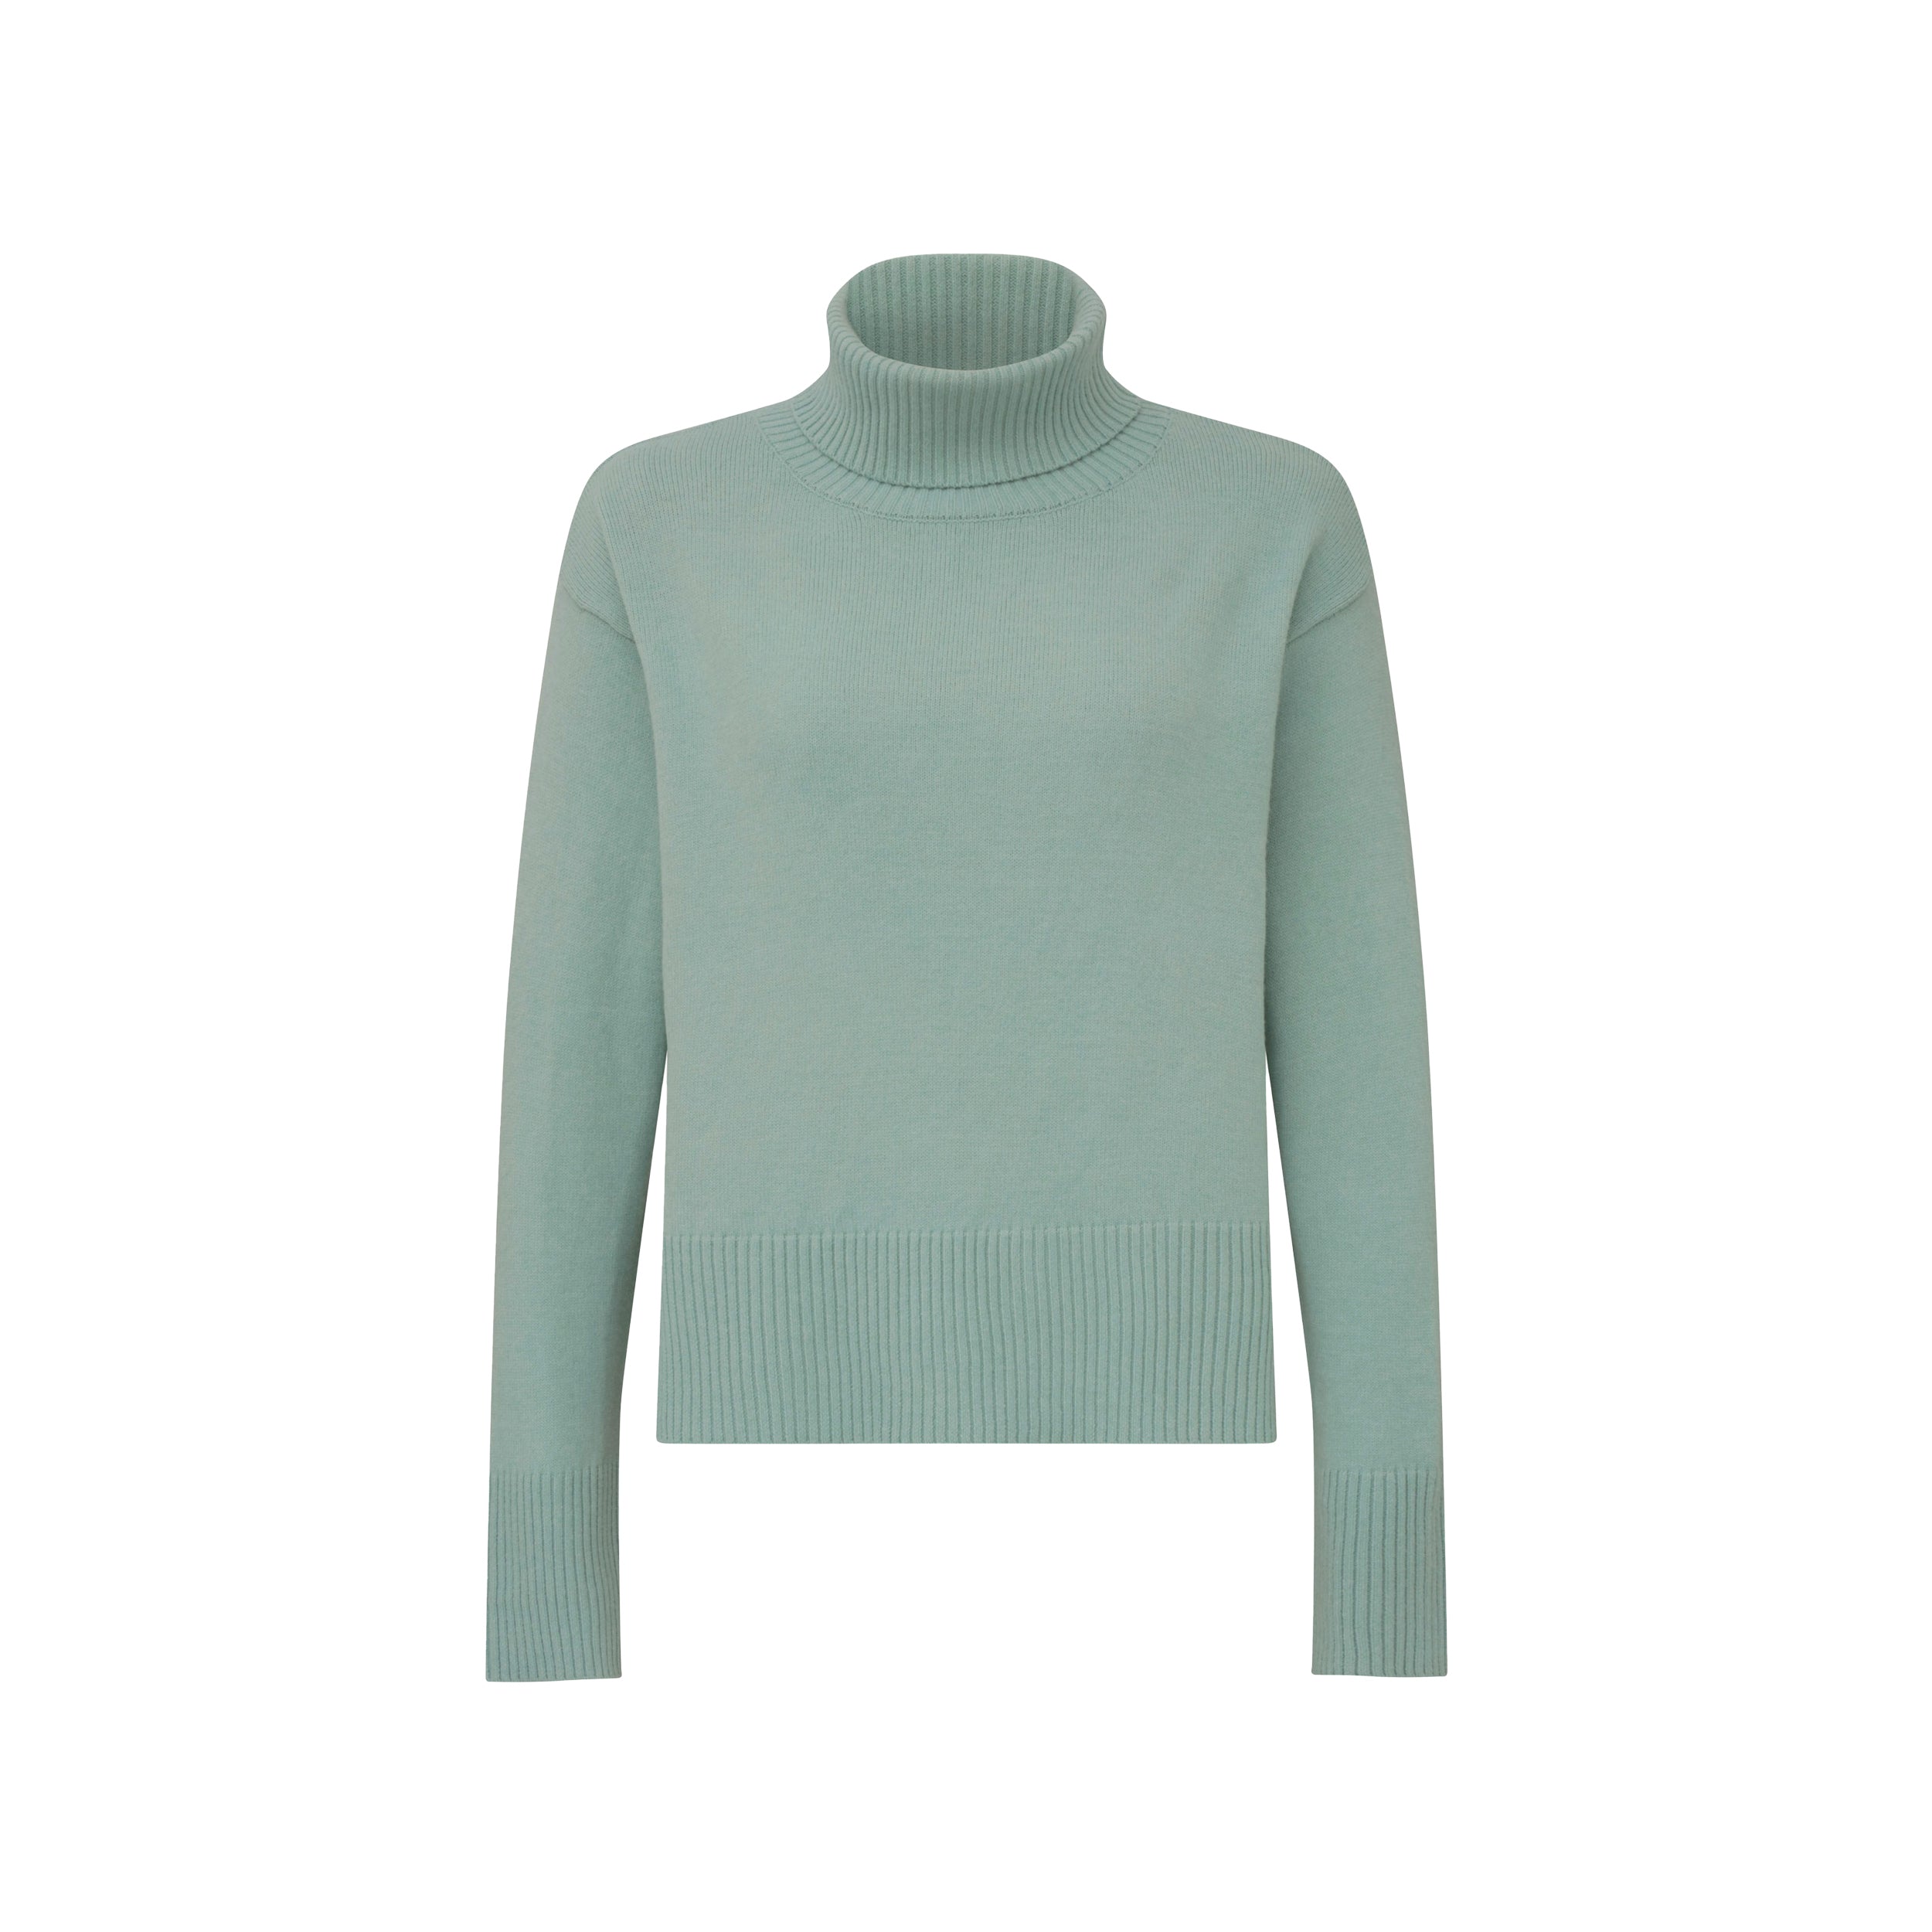 Front product shot of green colored oversized sweater